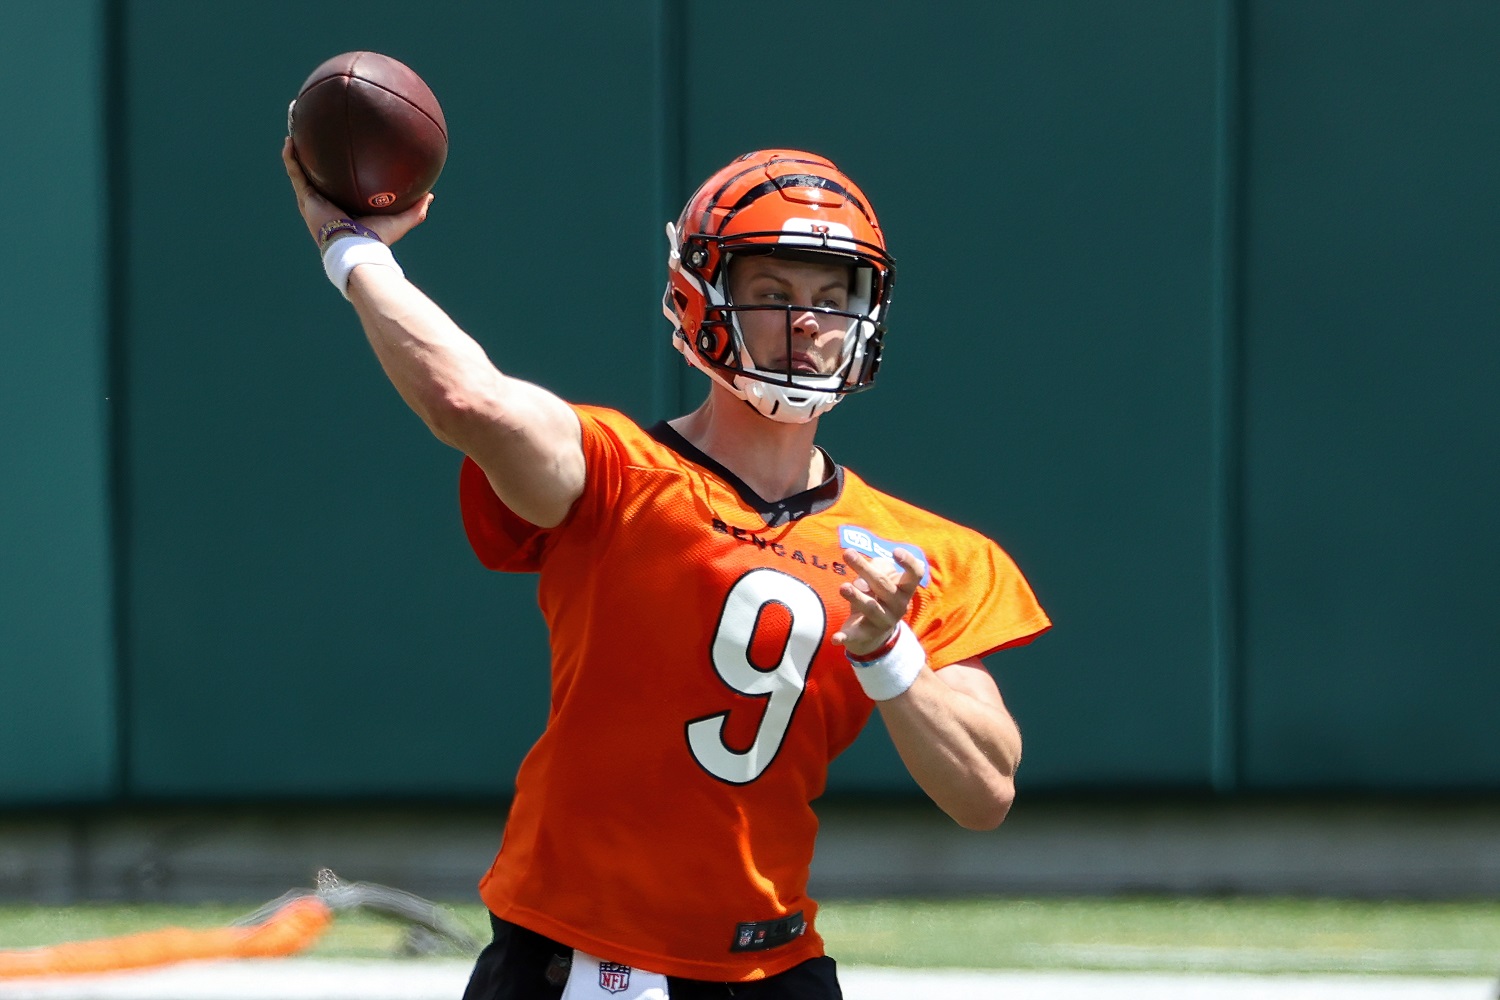 Joe Burrow of the Cincinnati Bengals throws a pass during minicamp on June 15, 2021. | Dylan Buell/Getty Images)